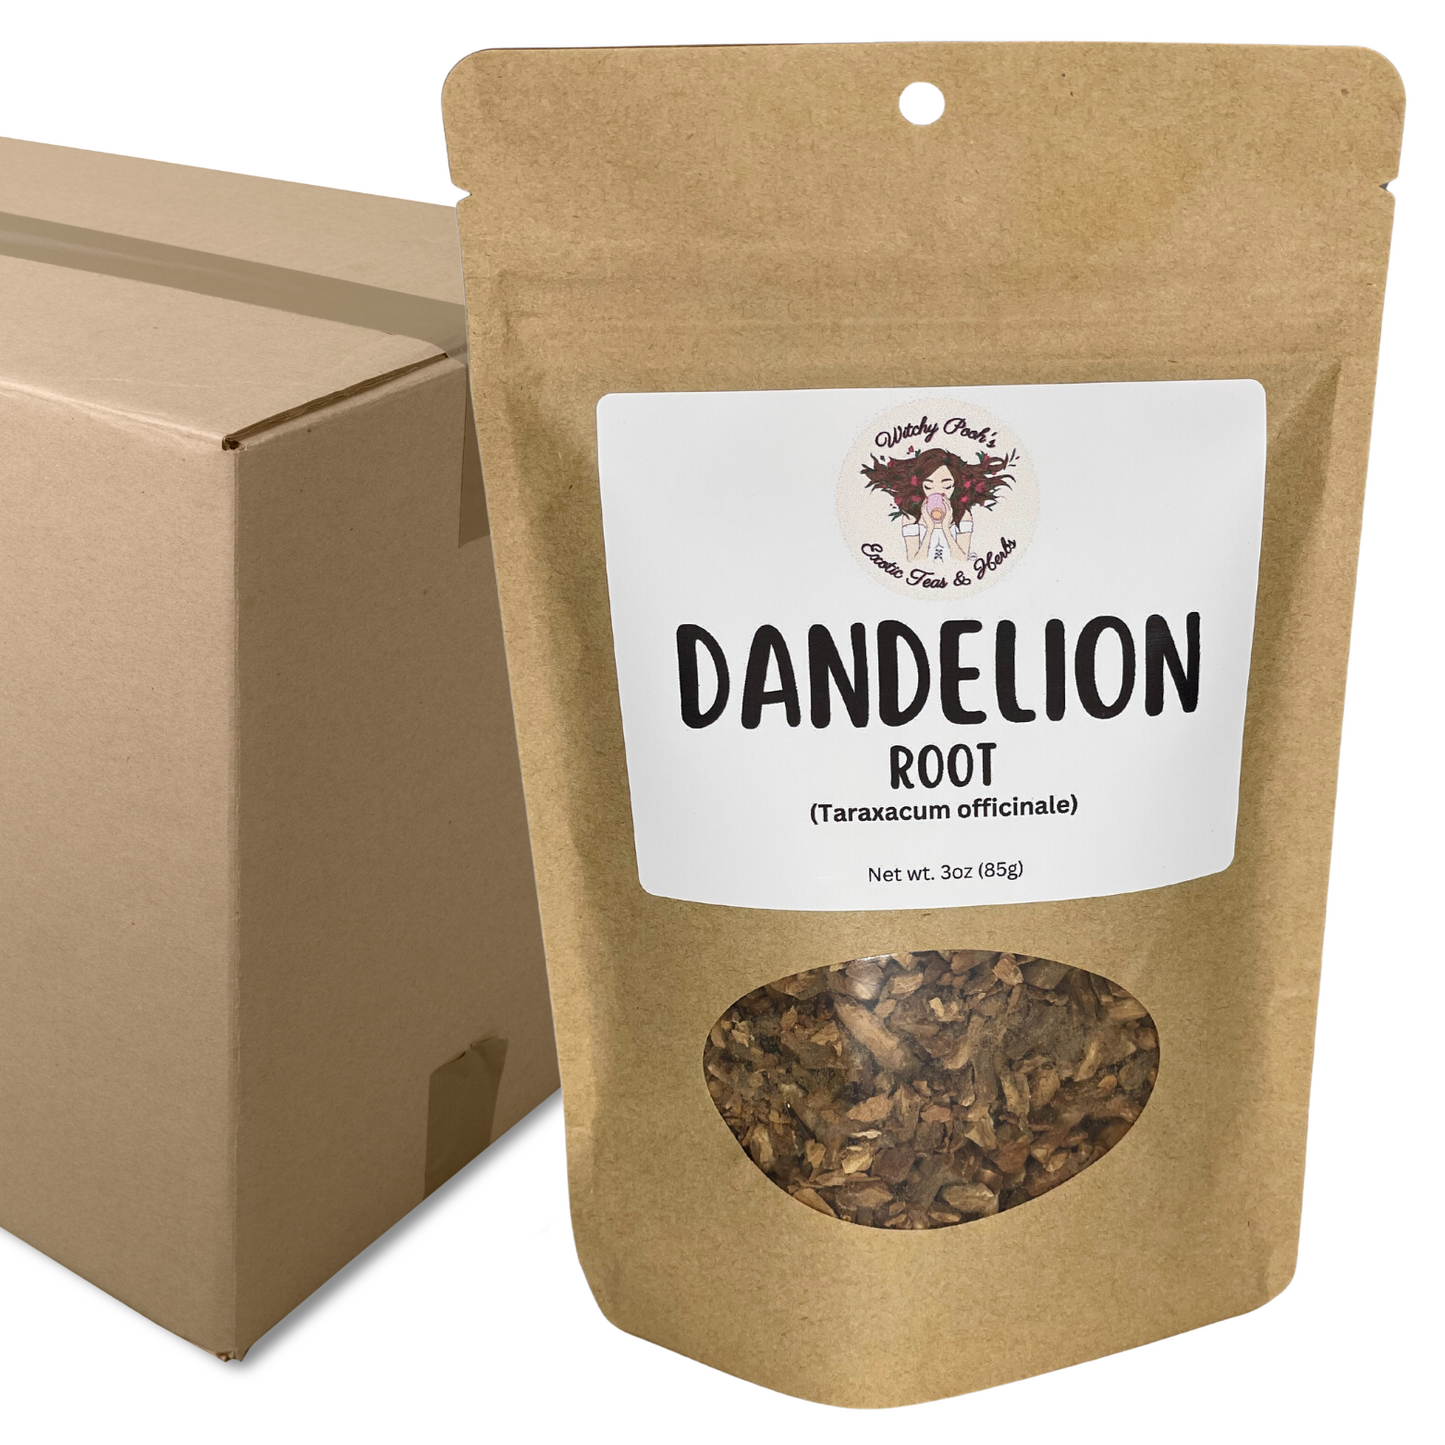 Witchy Pooh's Dandelion Root Loose Leaf Herbal Tea for Purification Rituals and Healing Ceremonies